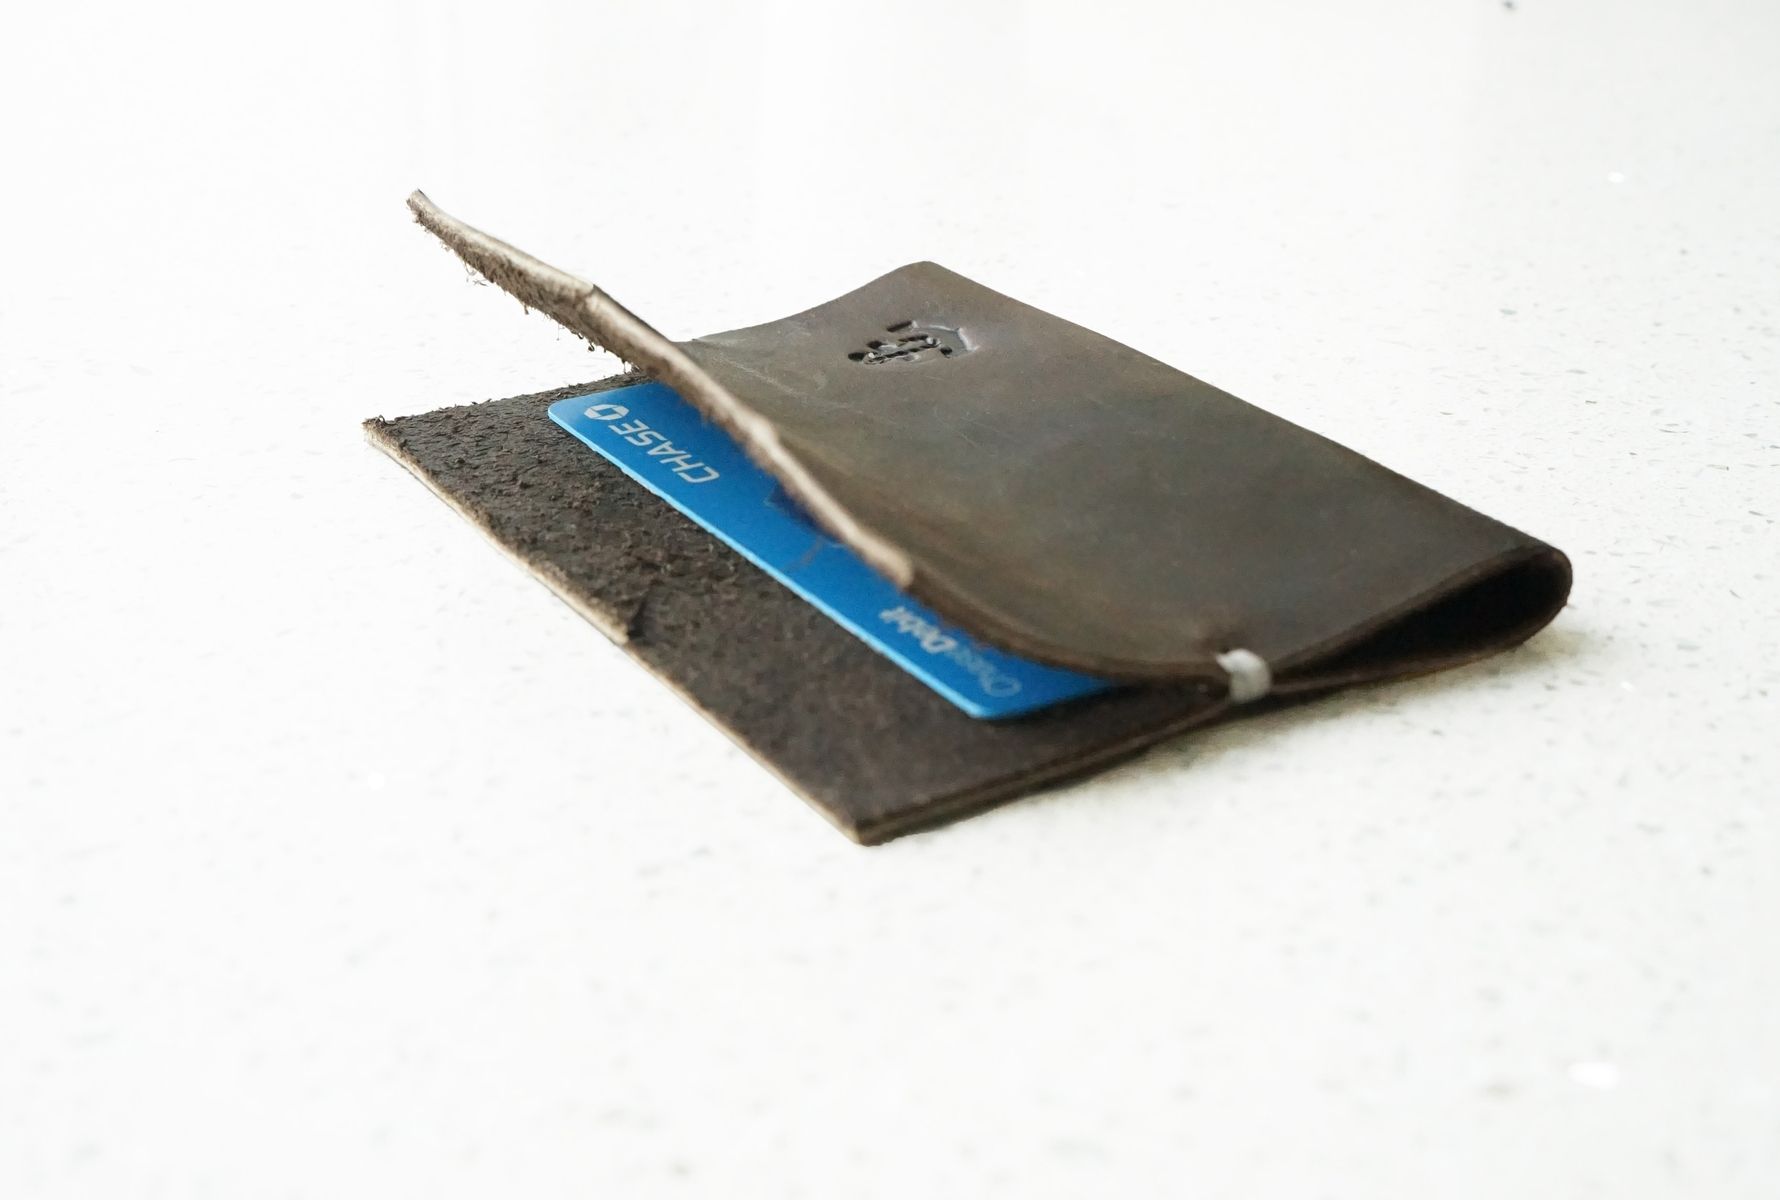 Minimalist Personalized Card Holder Wallet